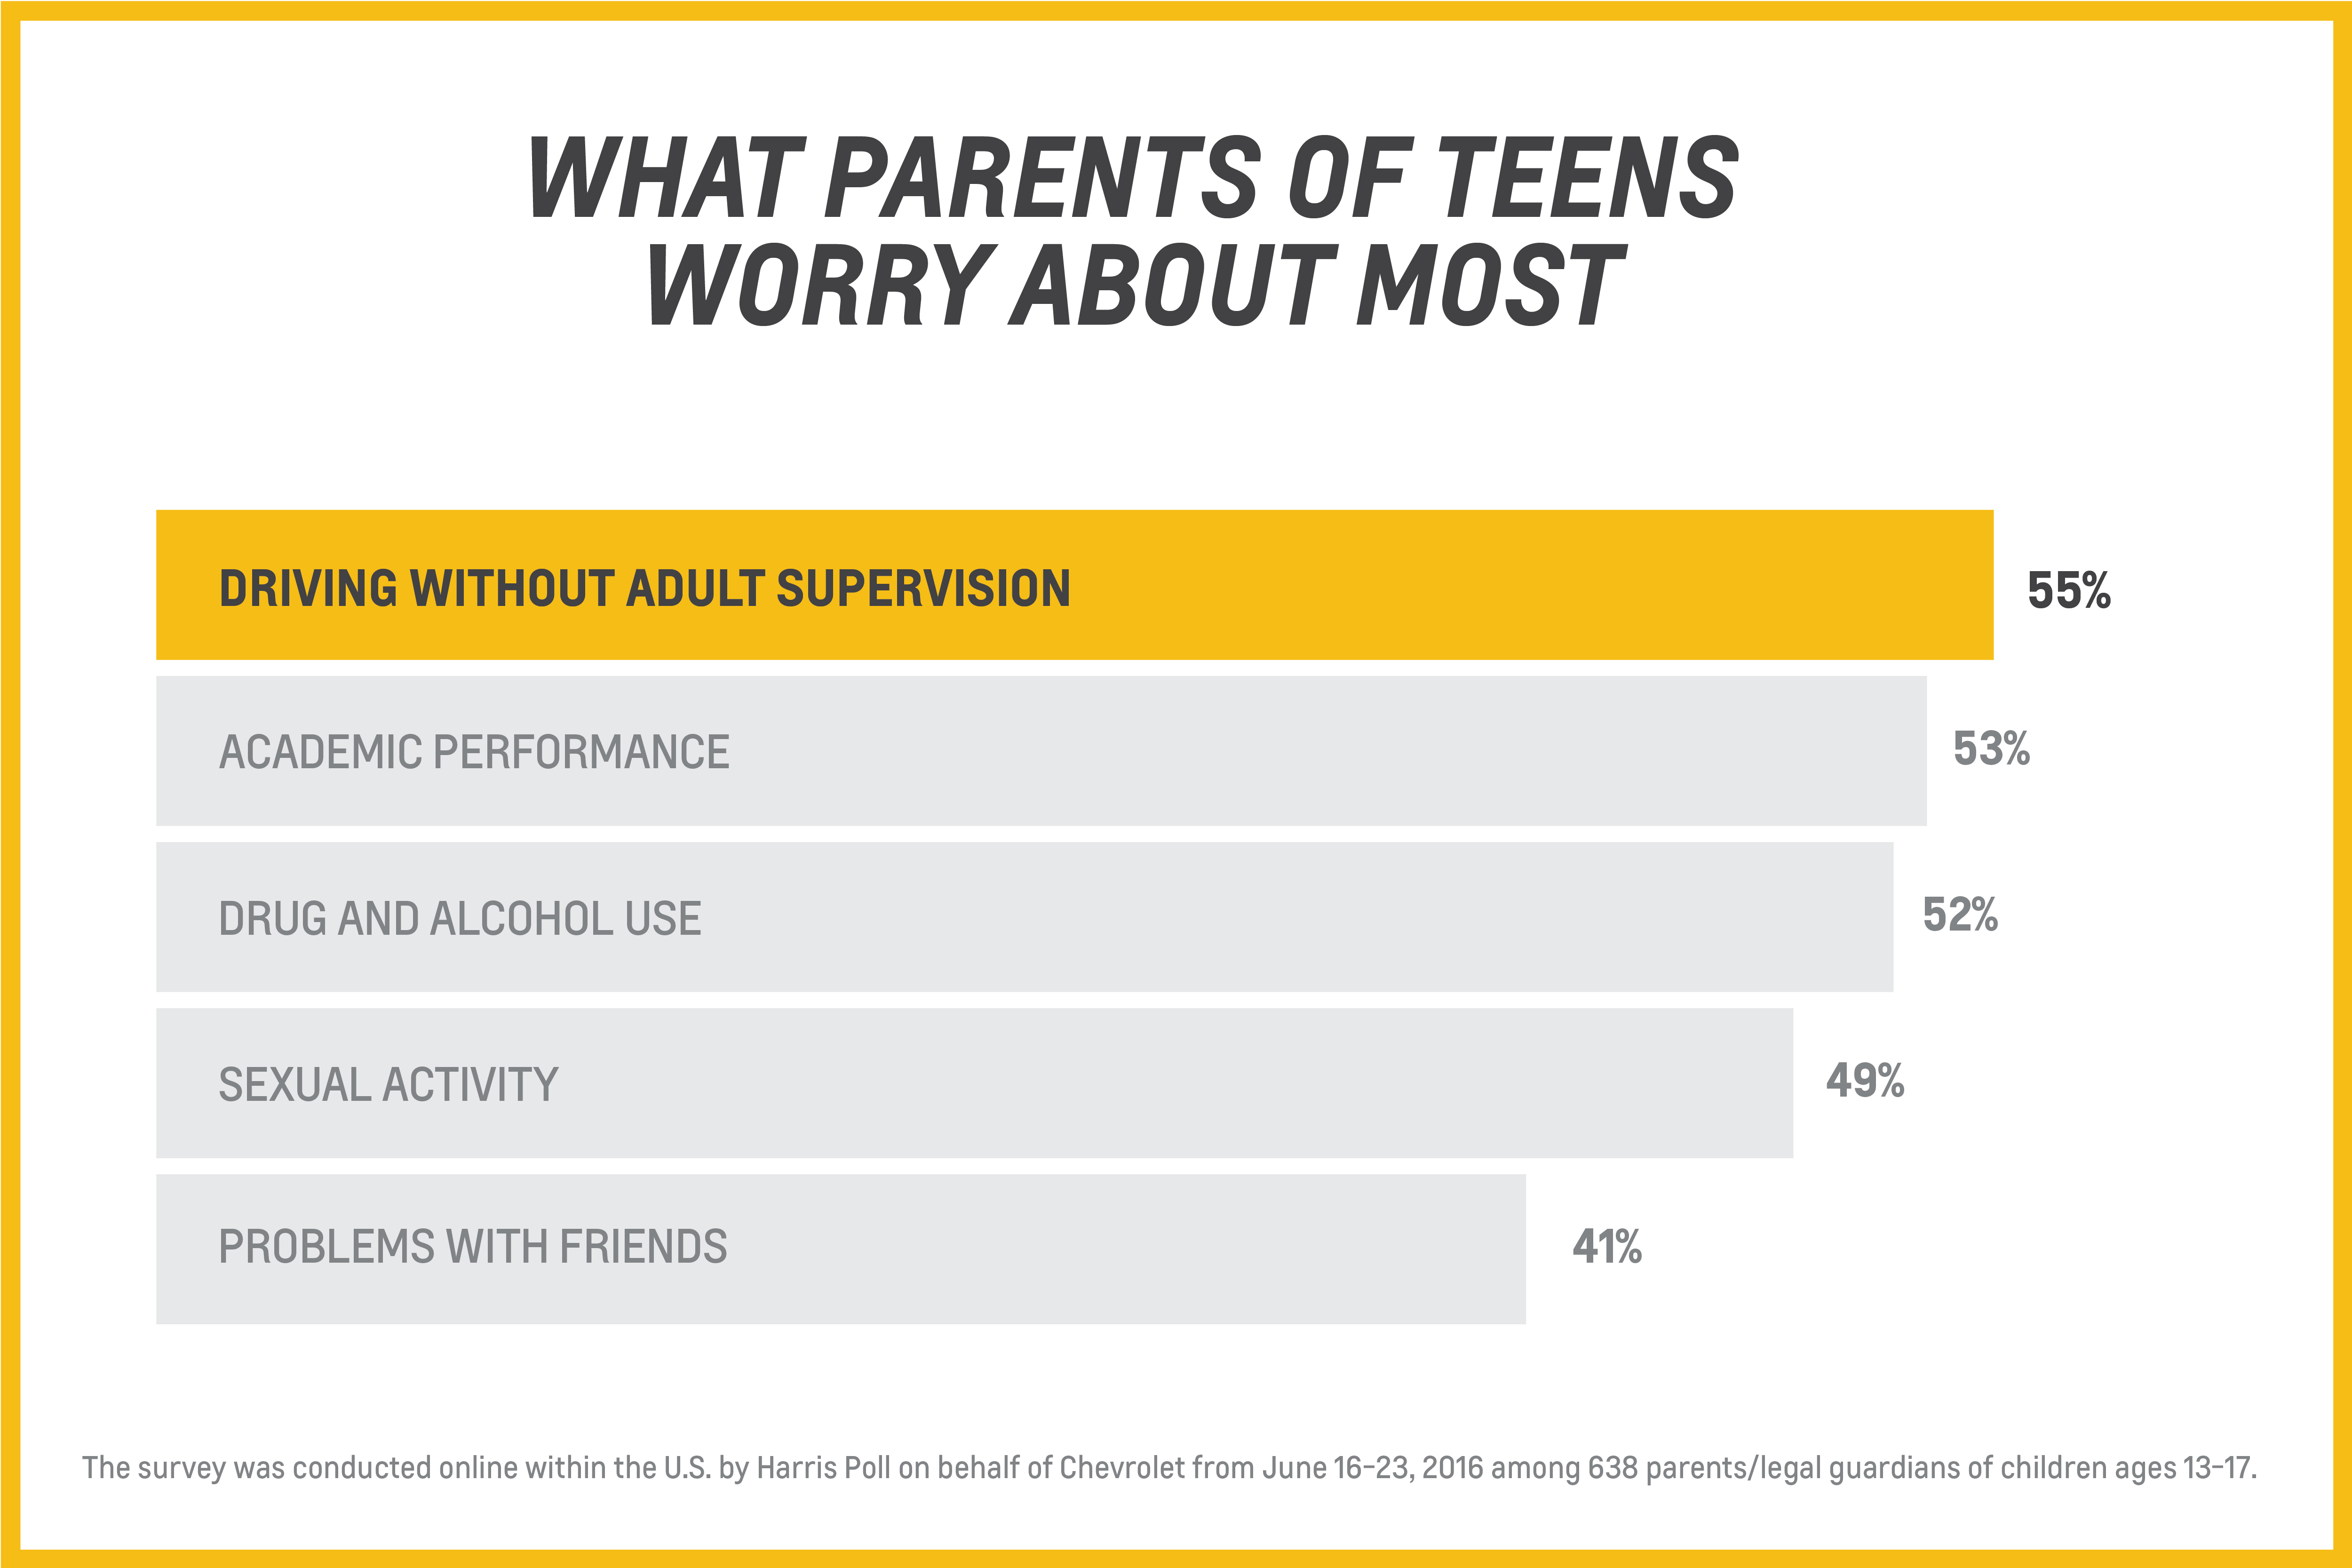 What Parents Worry About Teen Driving The Most